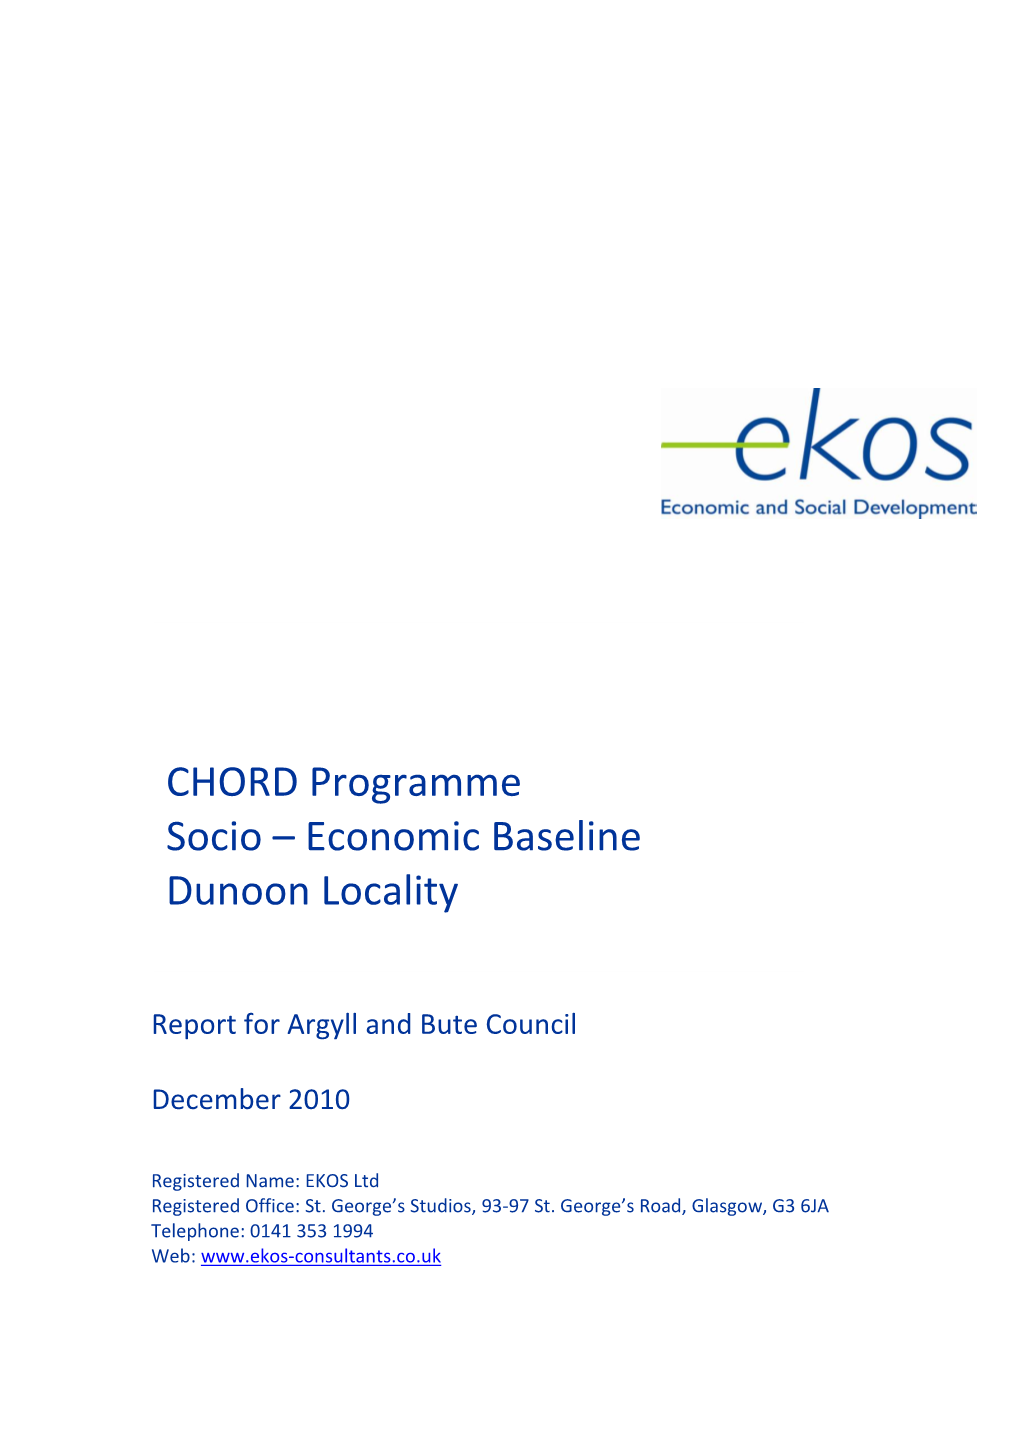 Report Title CHORD Programme Socio – Economic Baseline Dunoon Locality